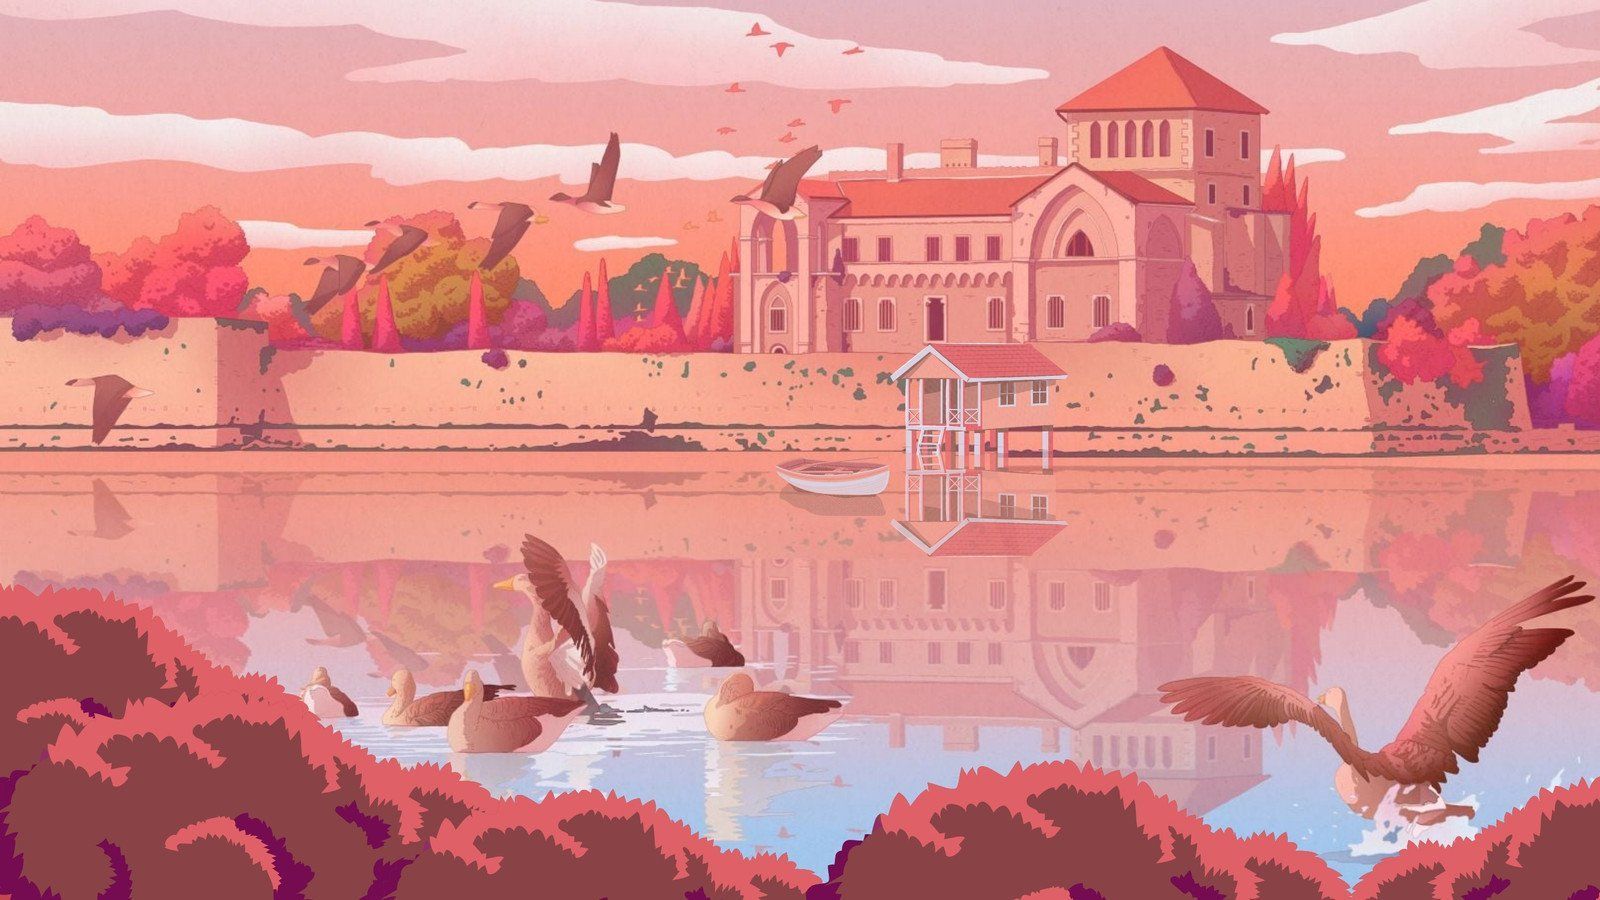 A painting of an old castle on the water - Desktop, pink, anime landscape, pixel art, Windows 10, art, pink anime, anime city, anime, illustration, lake